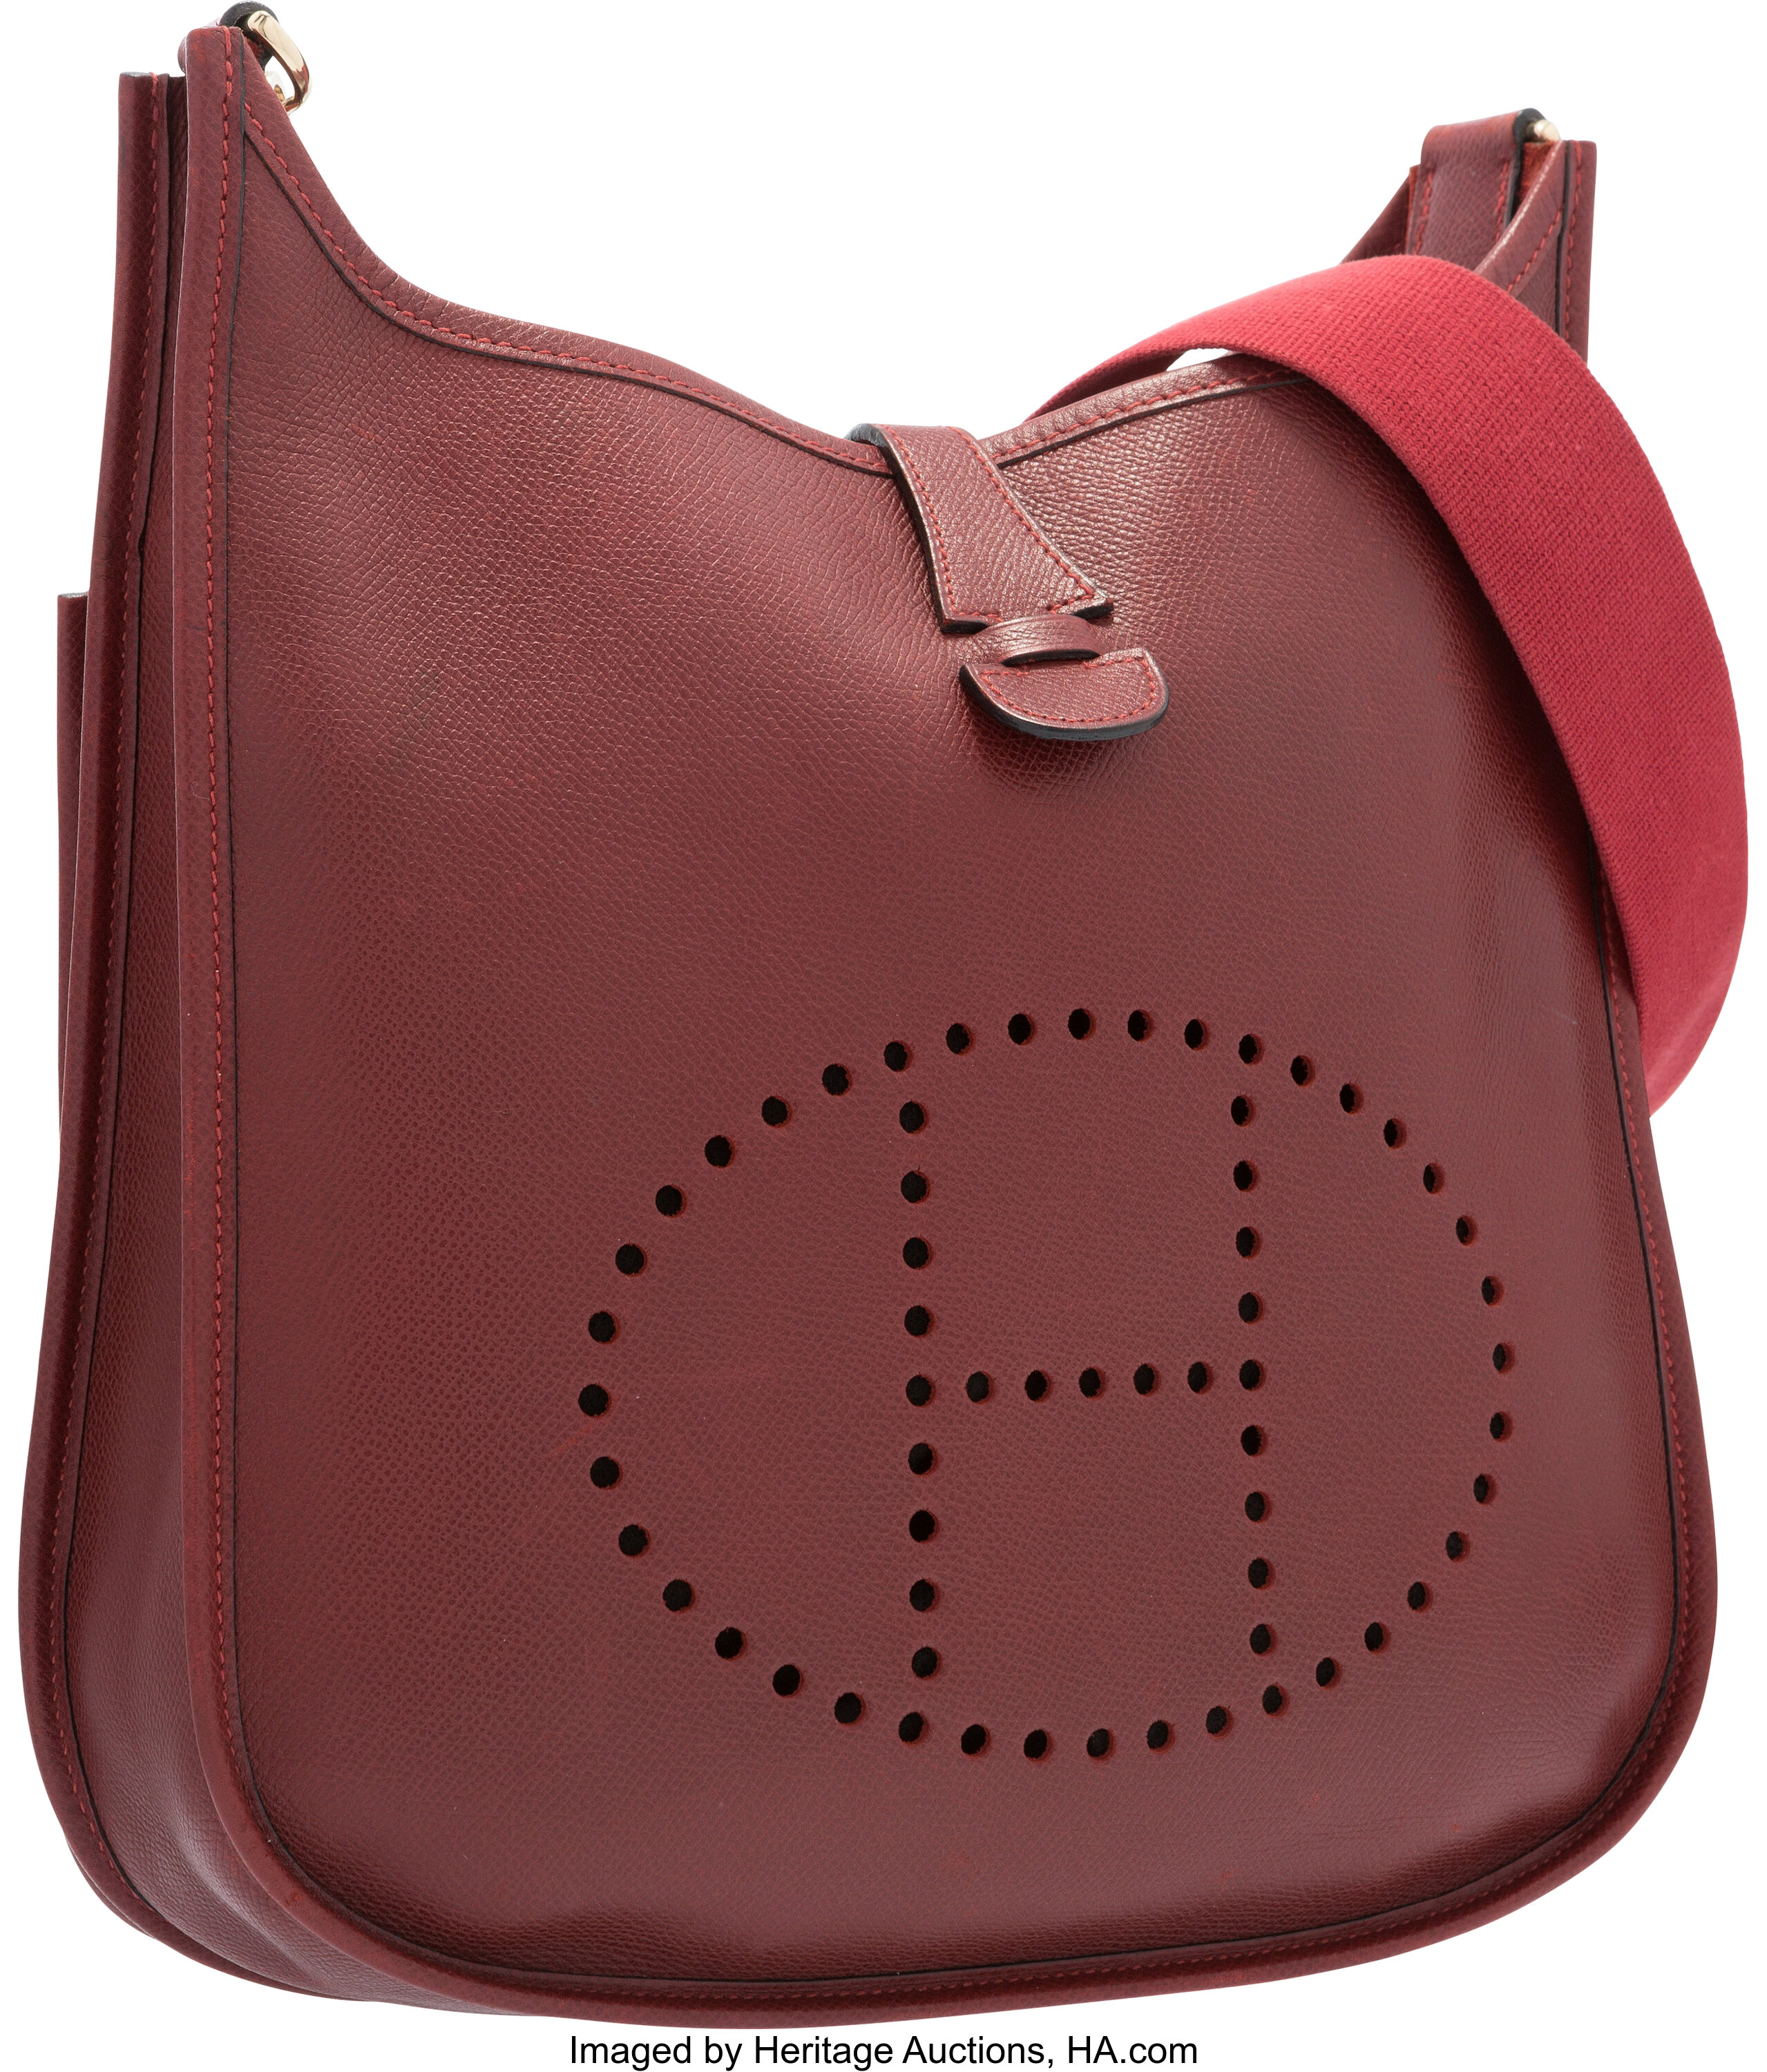 Sold at Auction: Hermes Rouge Red 'Evelyne PM' Leather Bag